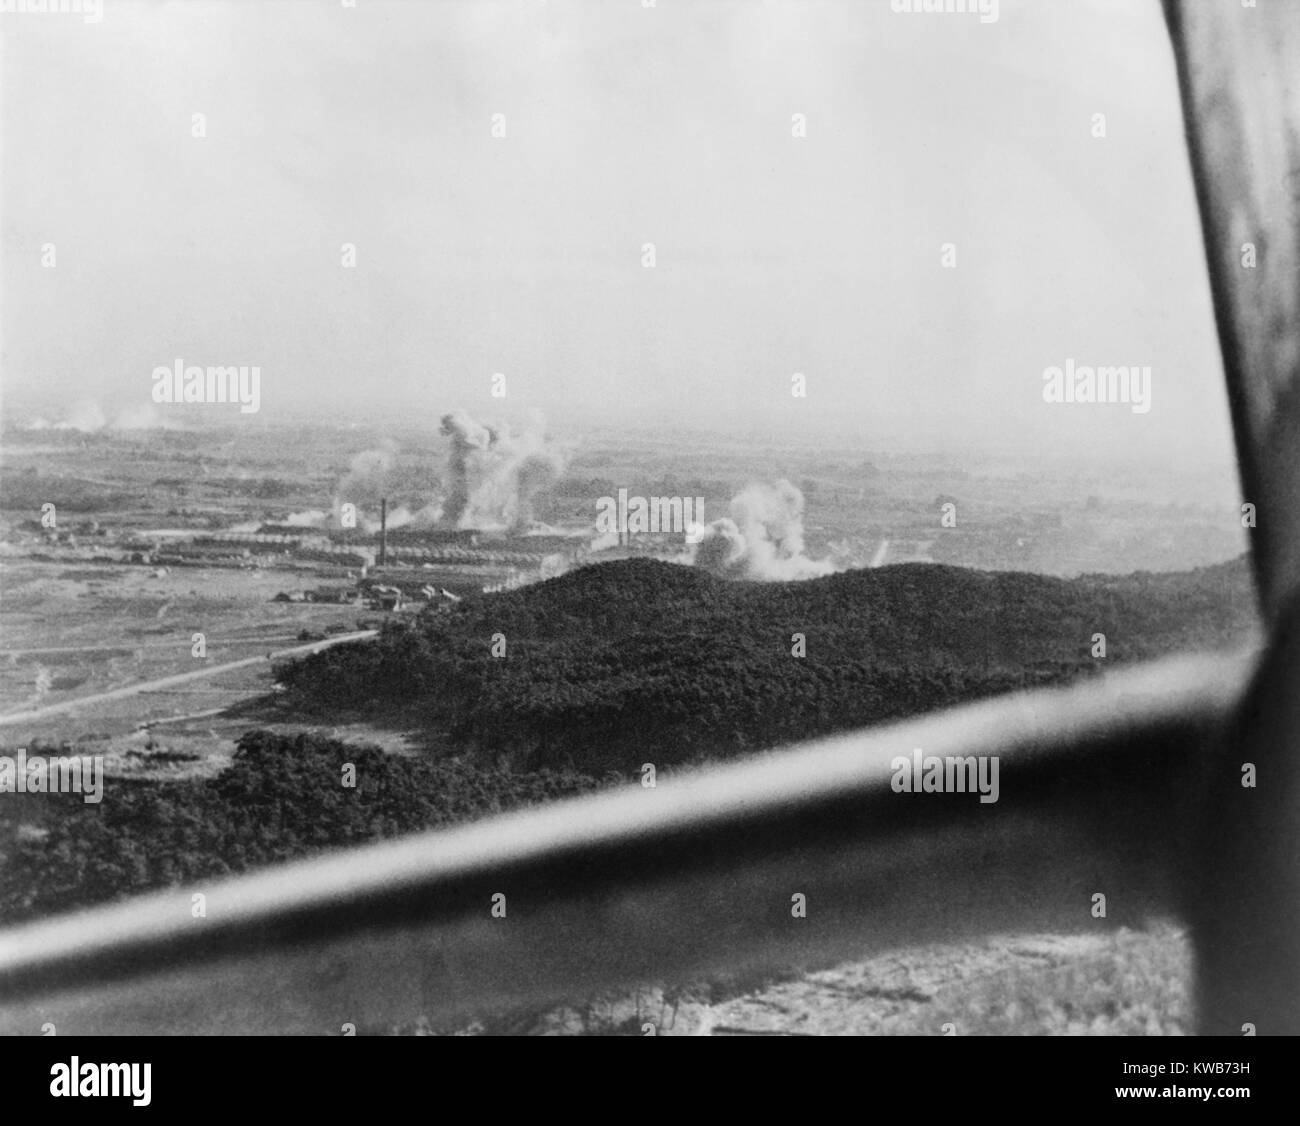 U.S. carrier-based planes bomb a factory plant near Tokyo in 1945. Framing the scene is the window of an American airplane. World War 2. (BSLOC 2014 10 118) Stock Photo